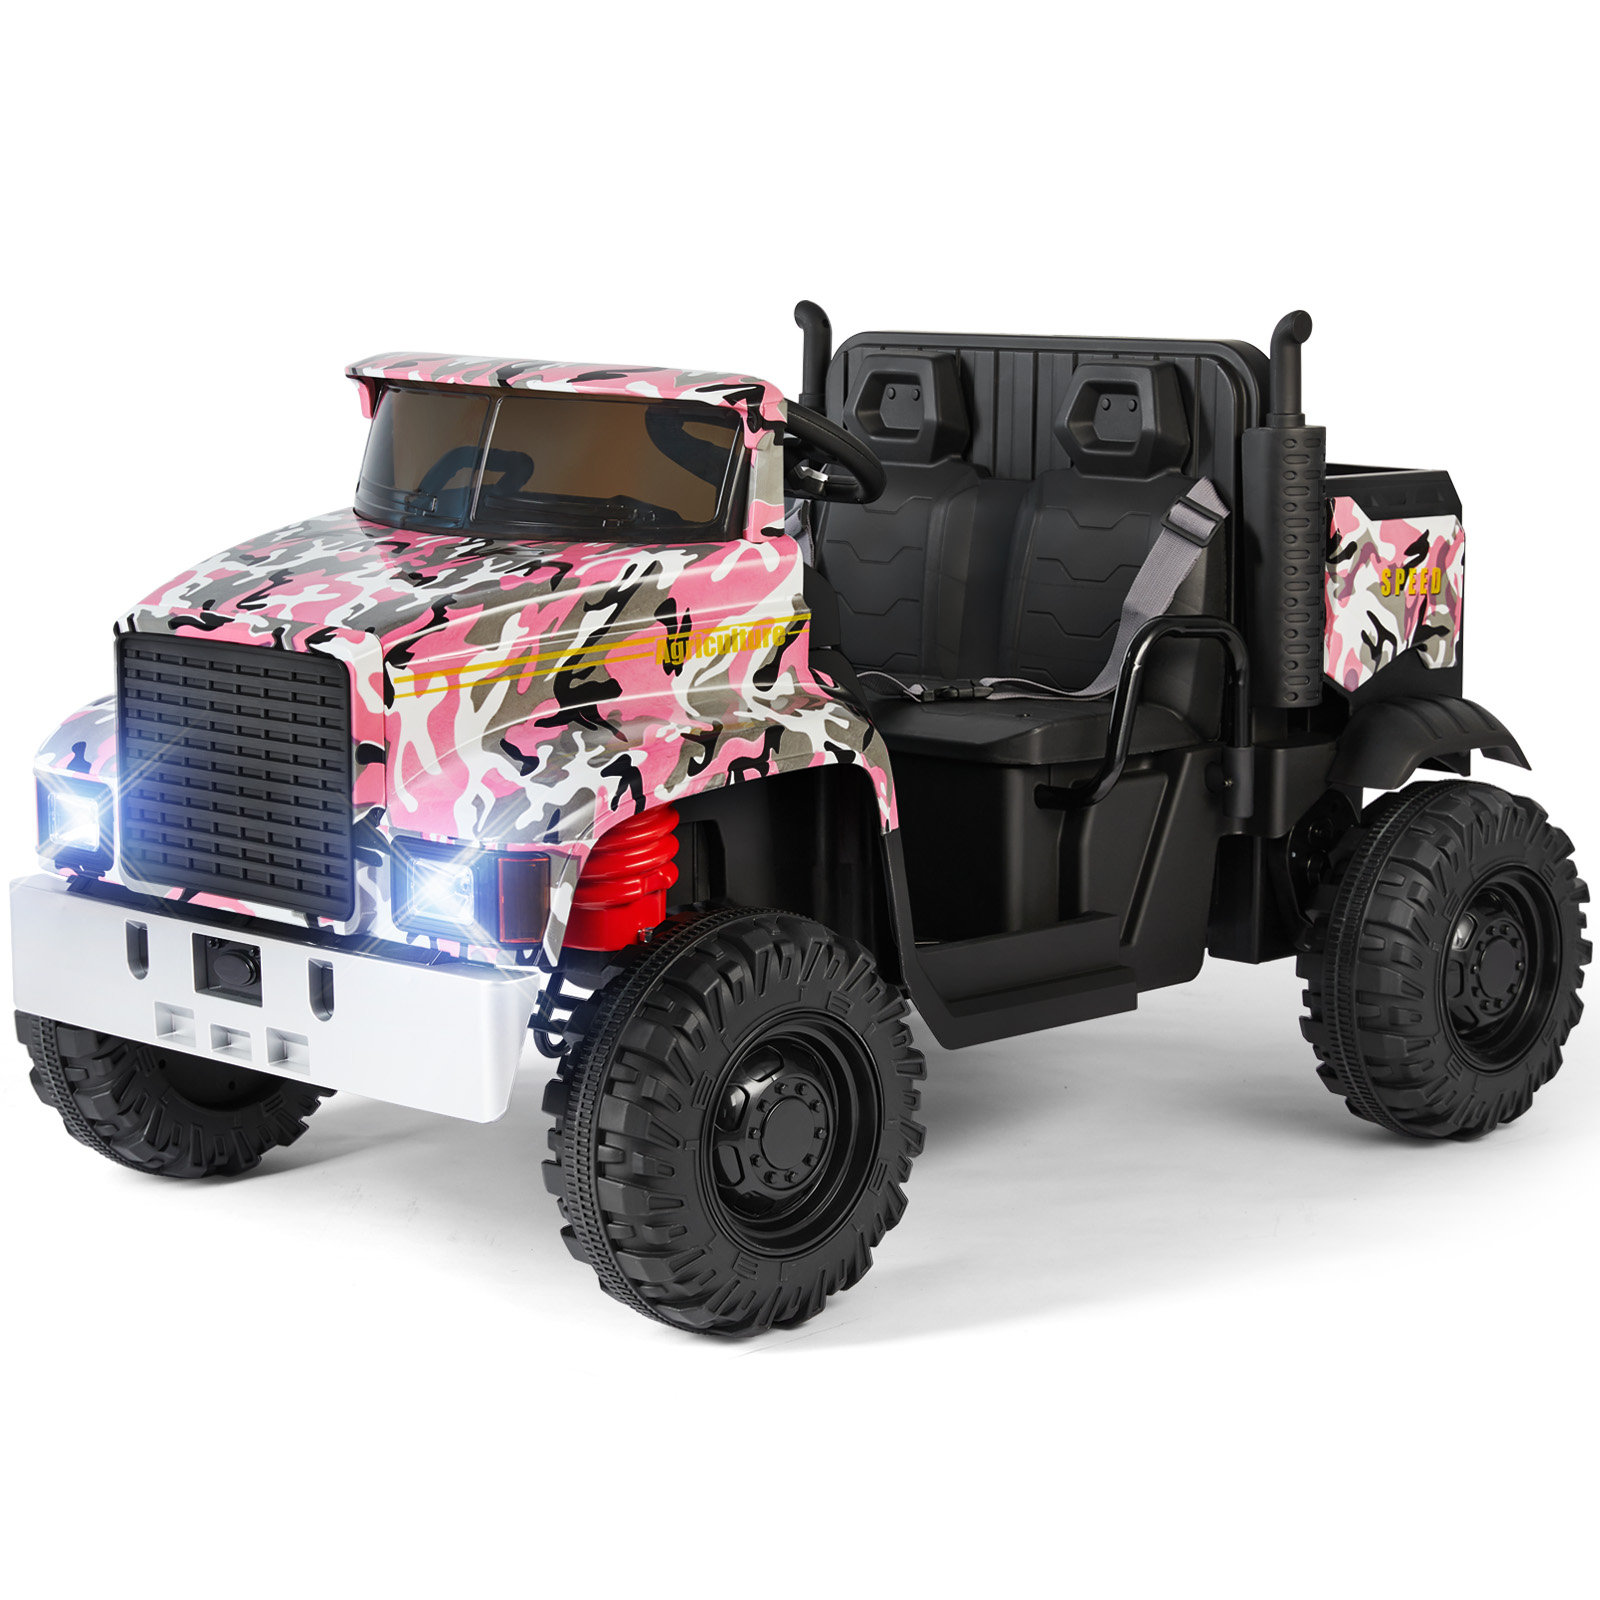 JOYLDIAS 24 Volt 2 Seater Tractors / Construction Battery Powered Ride On  with Remote Control